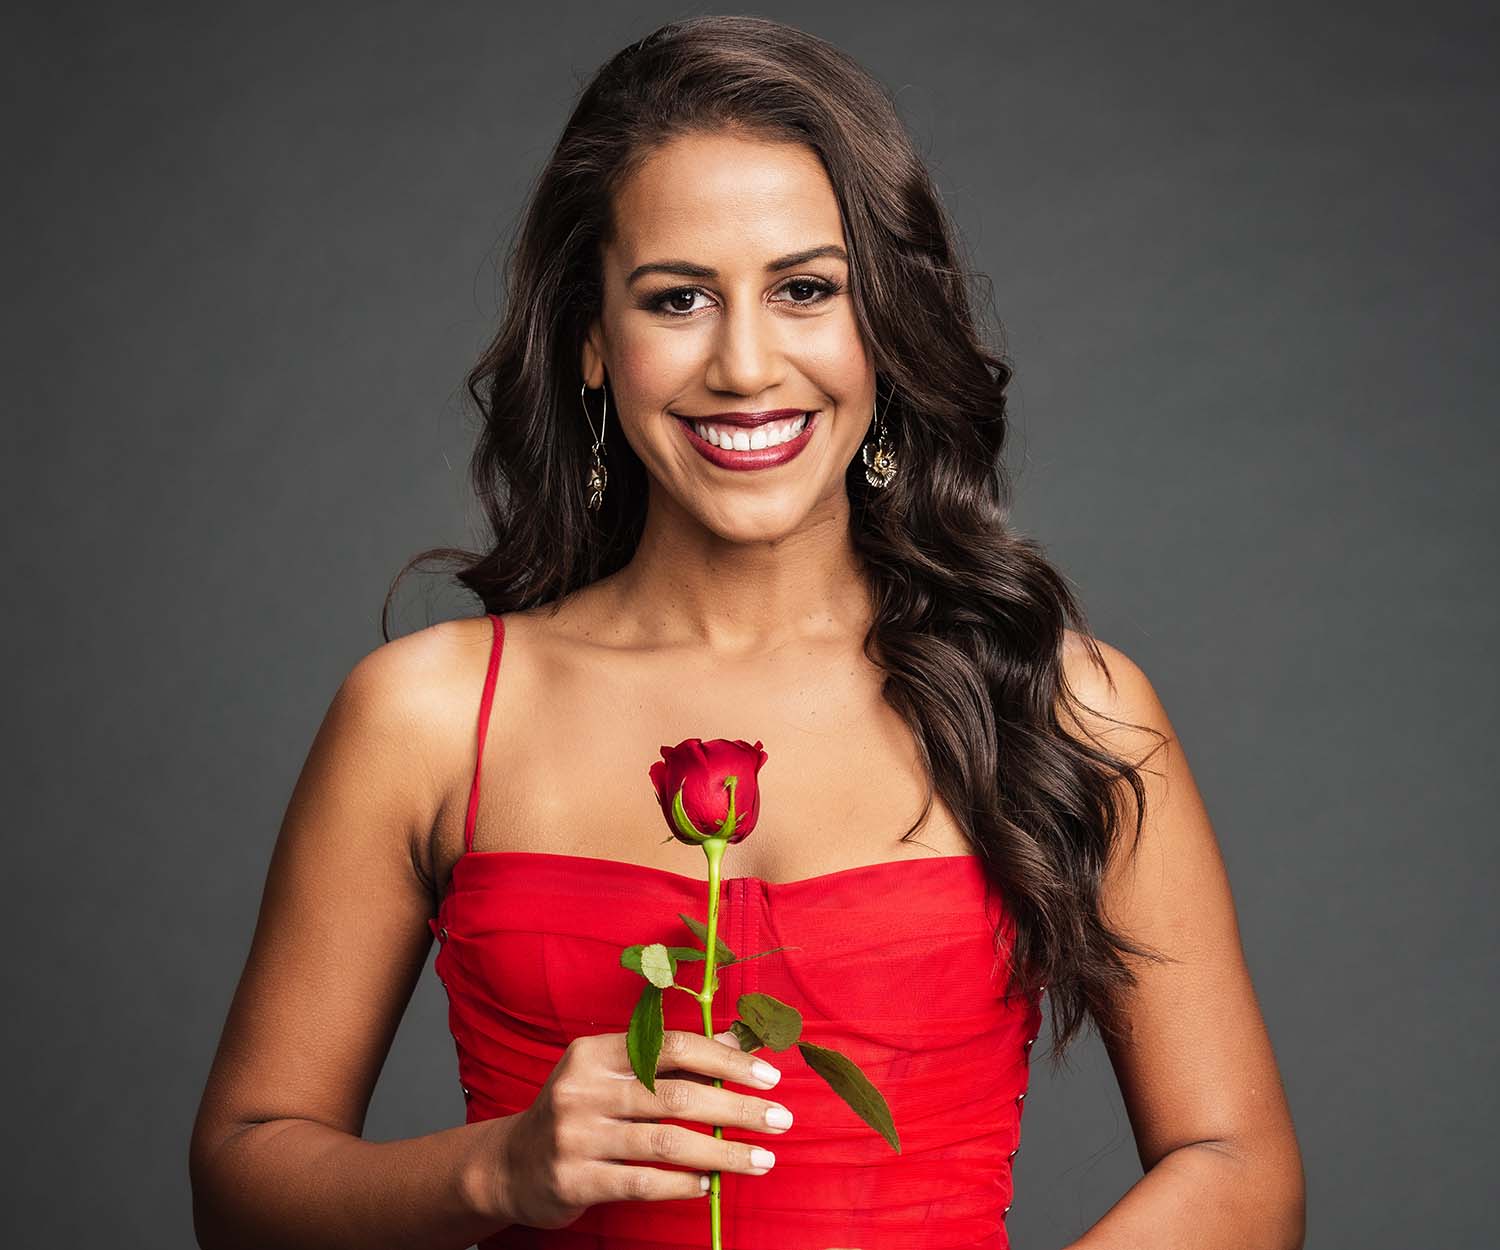 Meet the first batch of Kiwi men who’ll be vying for The Bachelorette’s affections